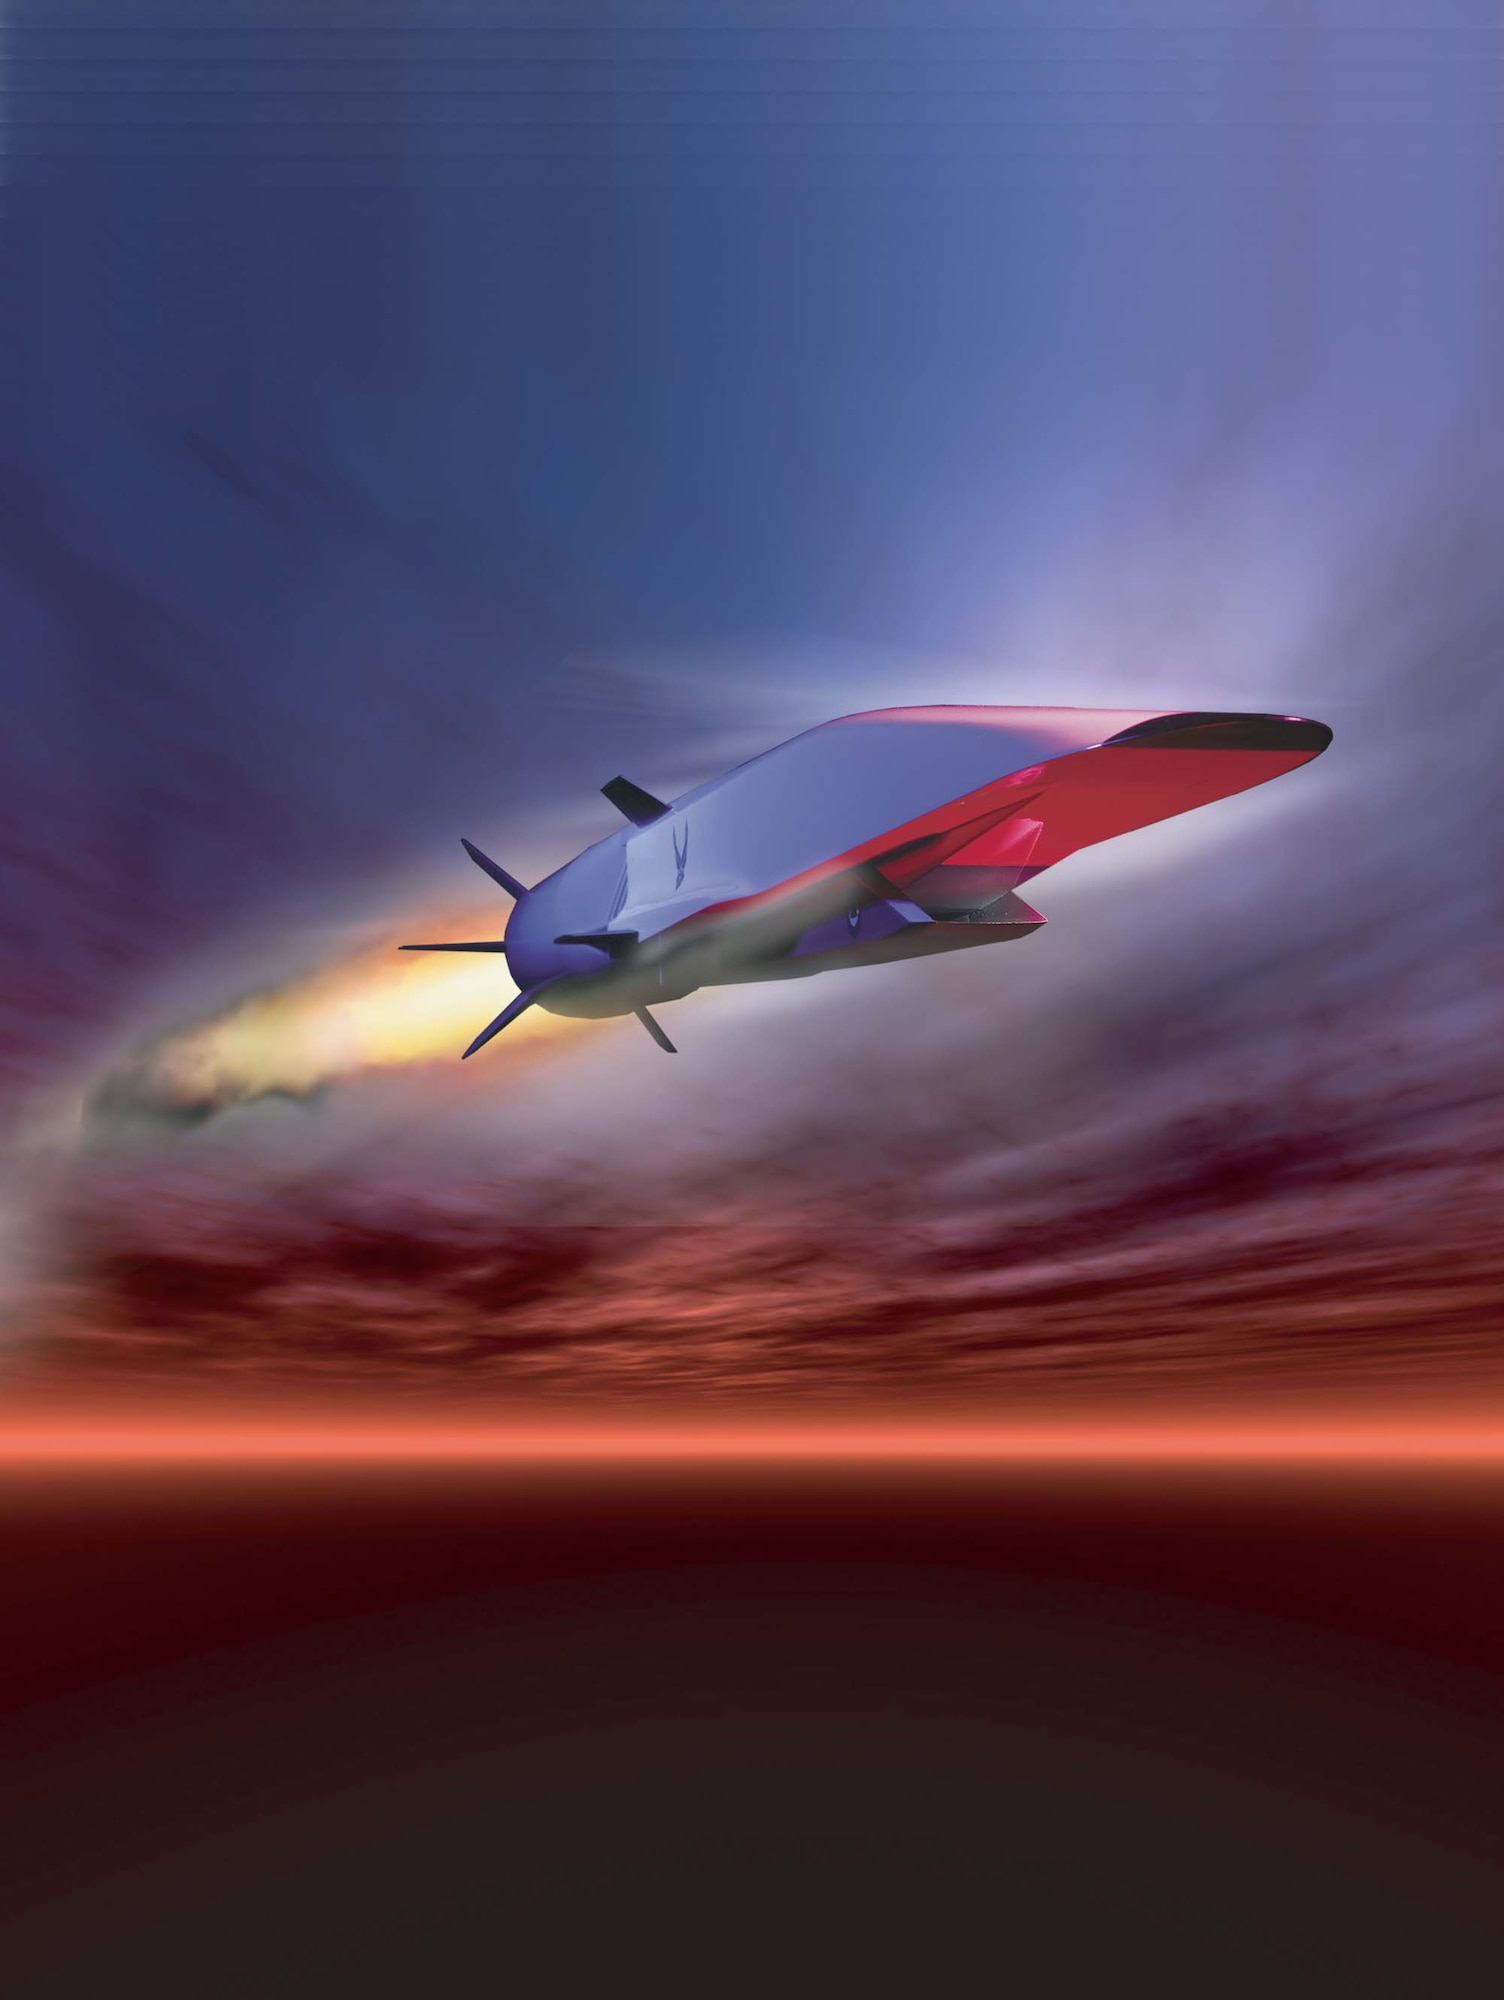 Air Force officials said the X-51A Waverider will make its first hypersonic flight test attempt Tuesday, May 25, after it’s released by a B-52 bomber off the southern California coast. Four X-51A cruisers have been built for the Air Force Research Laboratory by Boeing and Pratt & Whitney Rocketdyne.  The X-51A is powered by a supersonic combustion ramjet, or scramjet, engine which burns JP-7 jet fuel. (The Boeing Company)